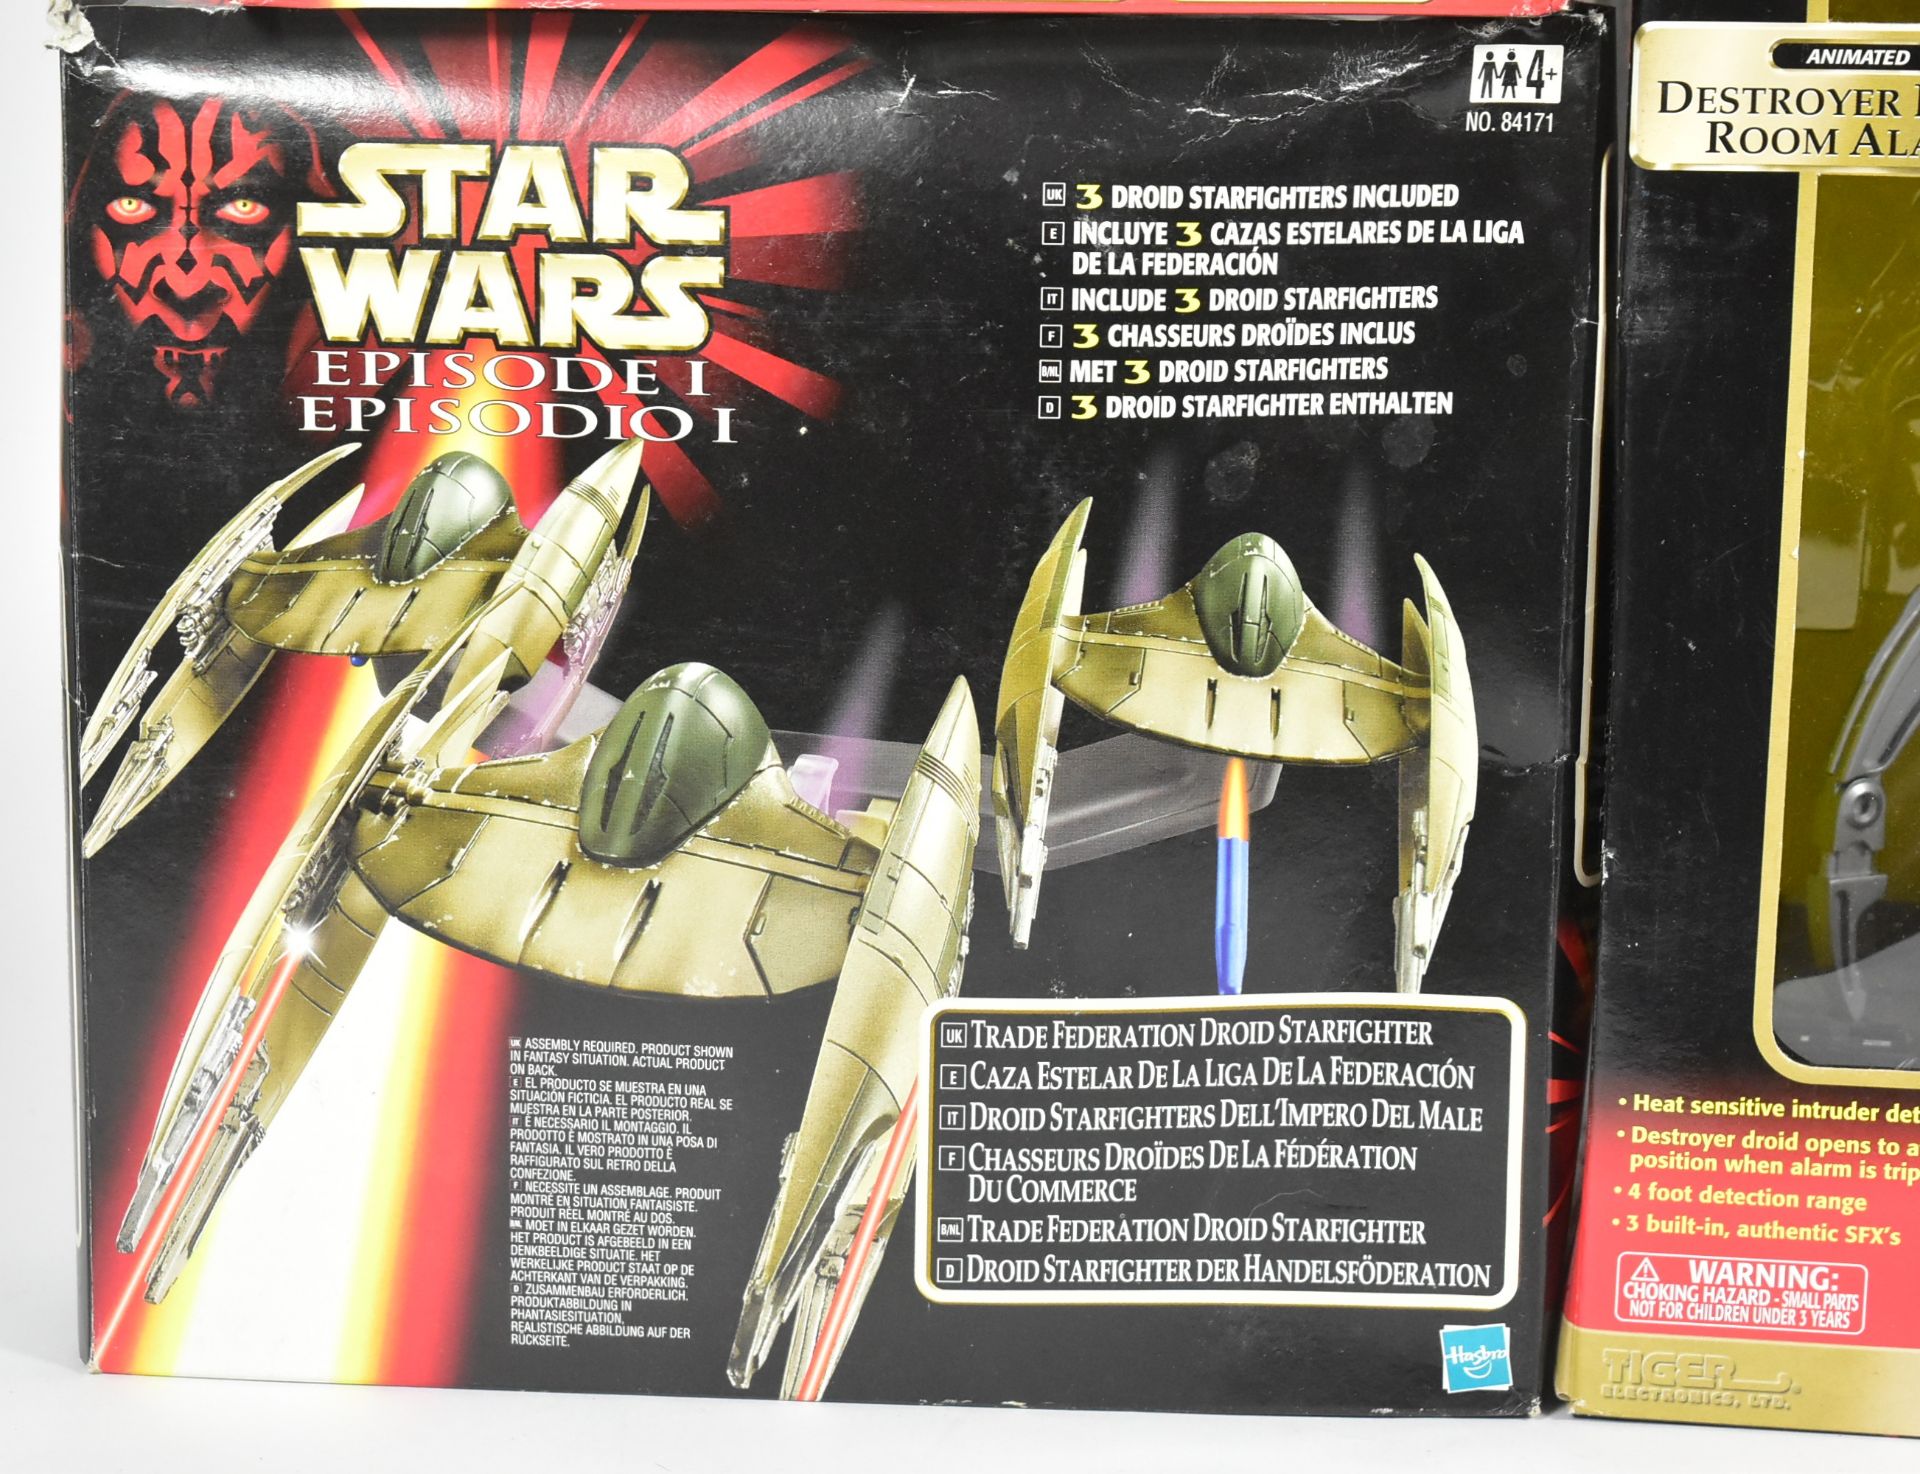 STAR WARS - EPISODE I - HASBRO BOXED ACTION FIGURE PLAYSETS - Image 6 of 6